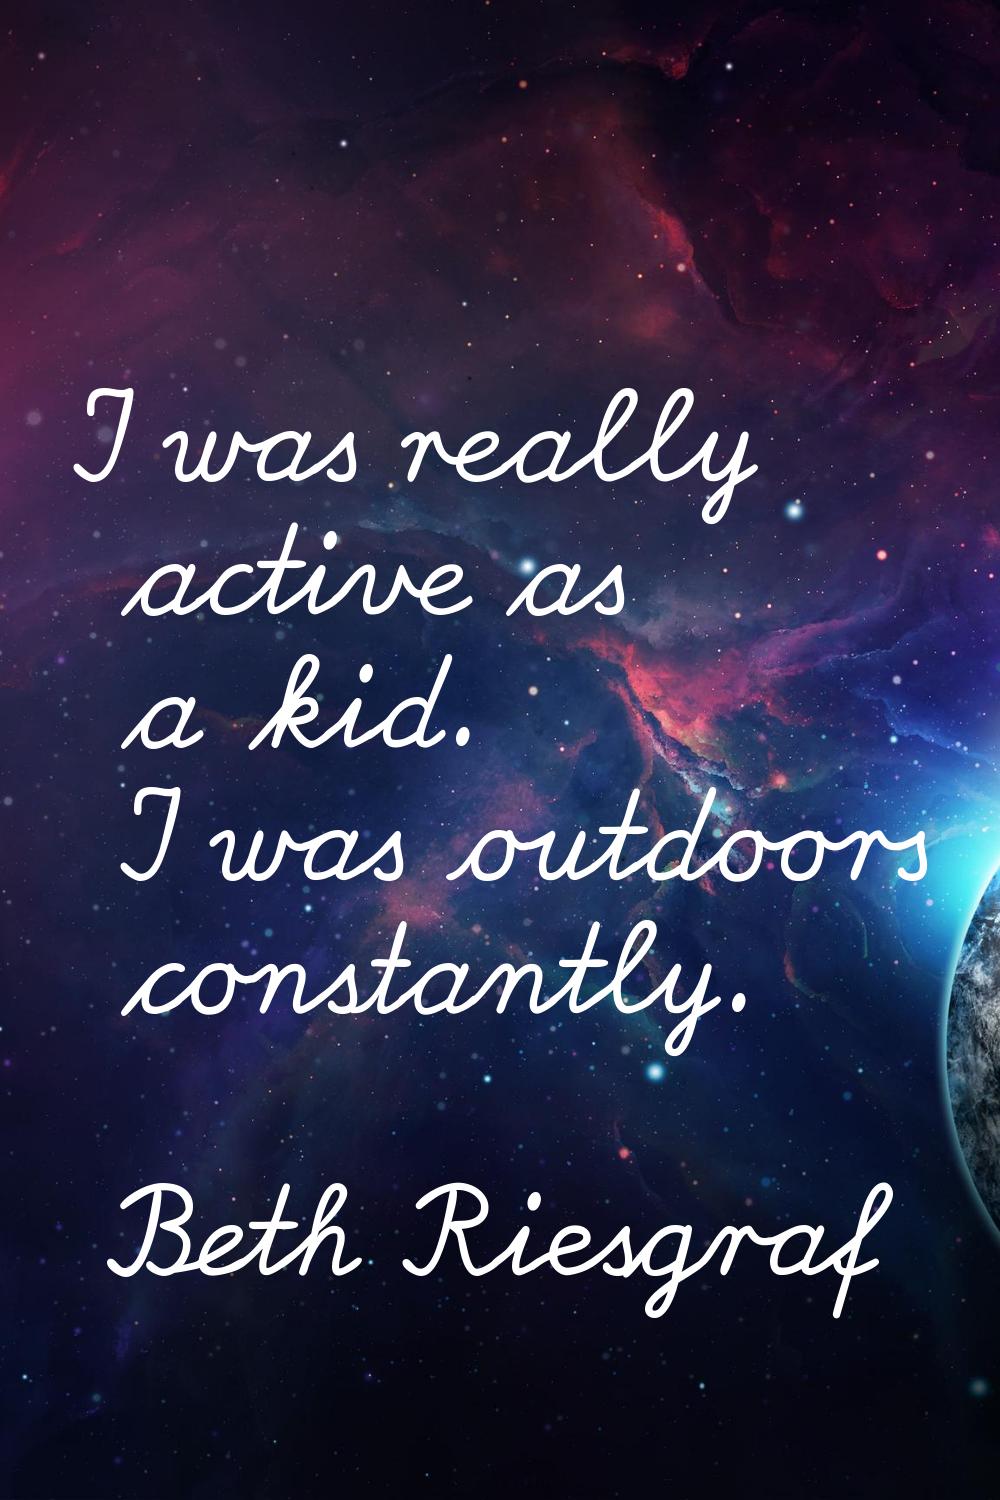 I was really active as a kid. I was outdoors constantly.